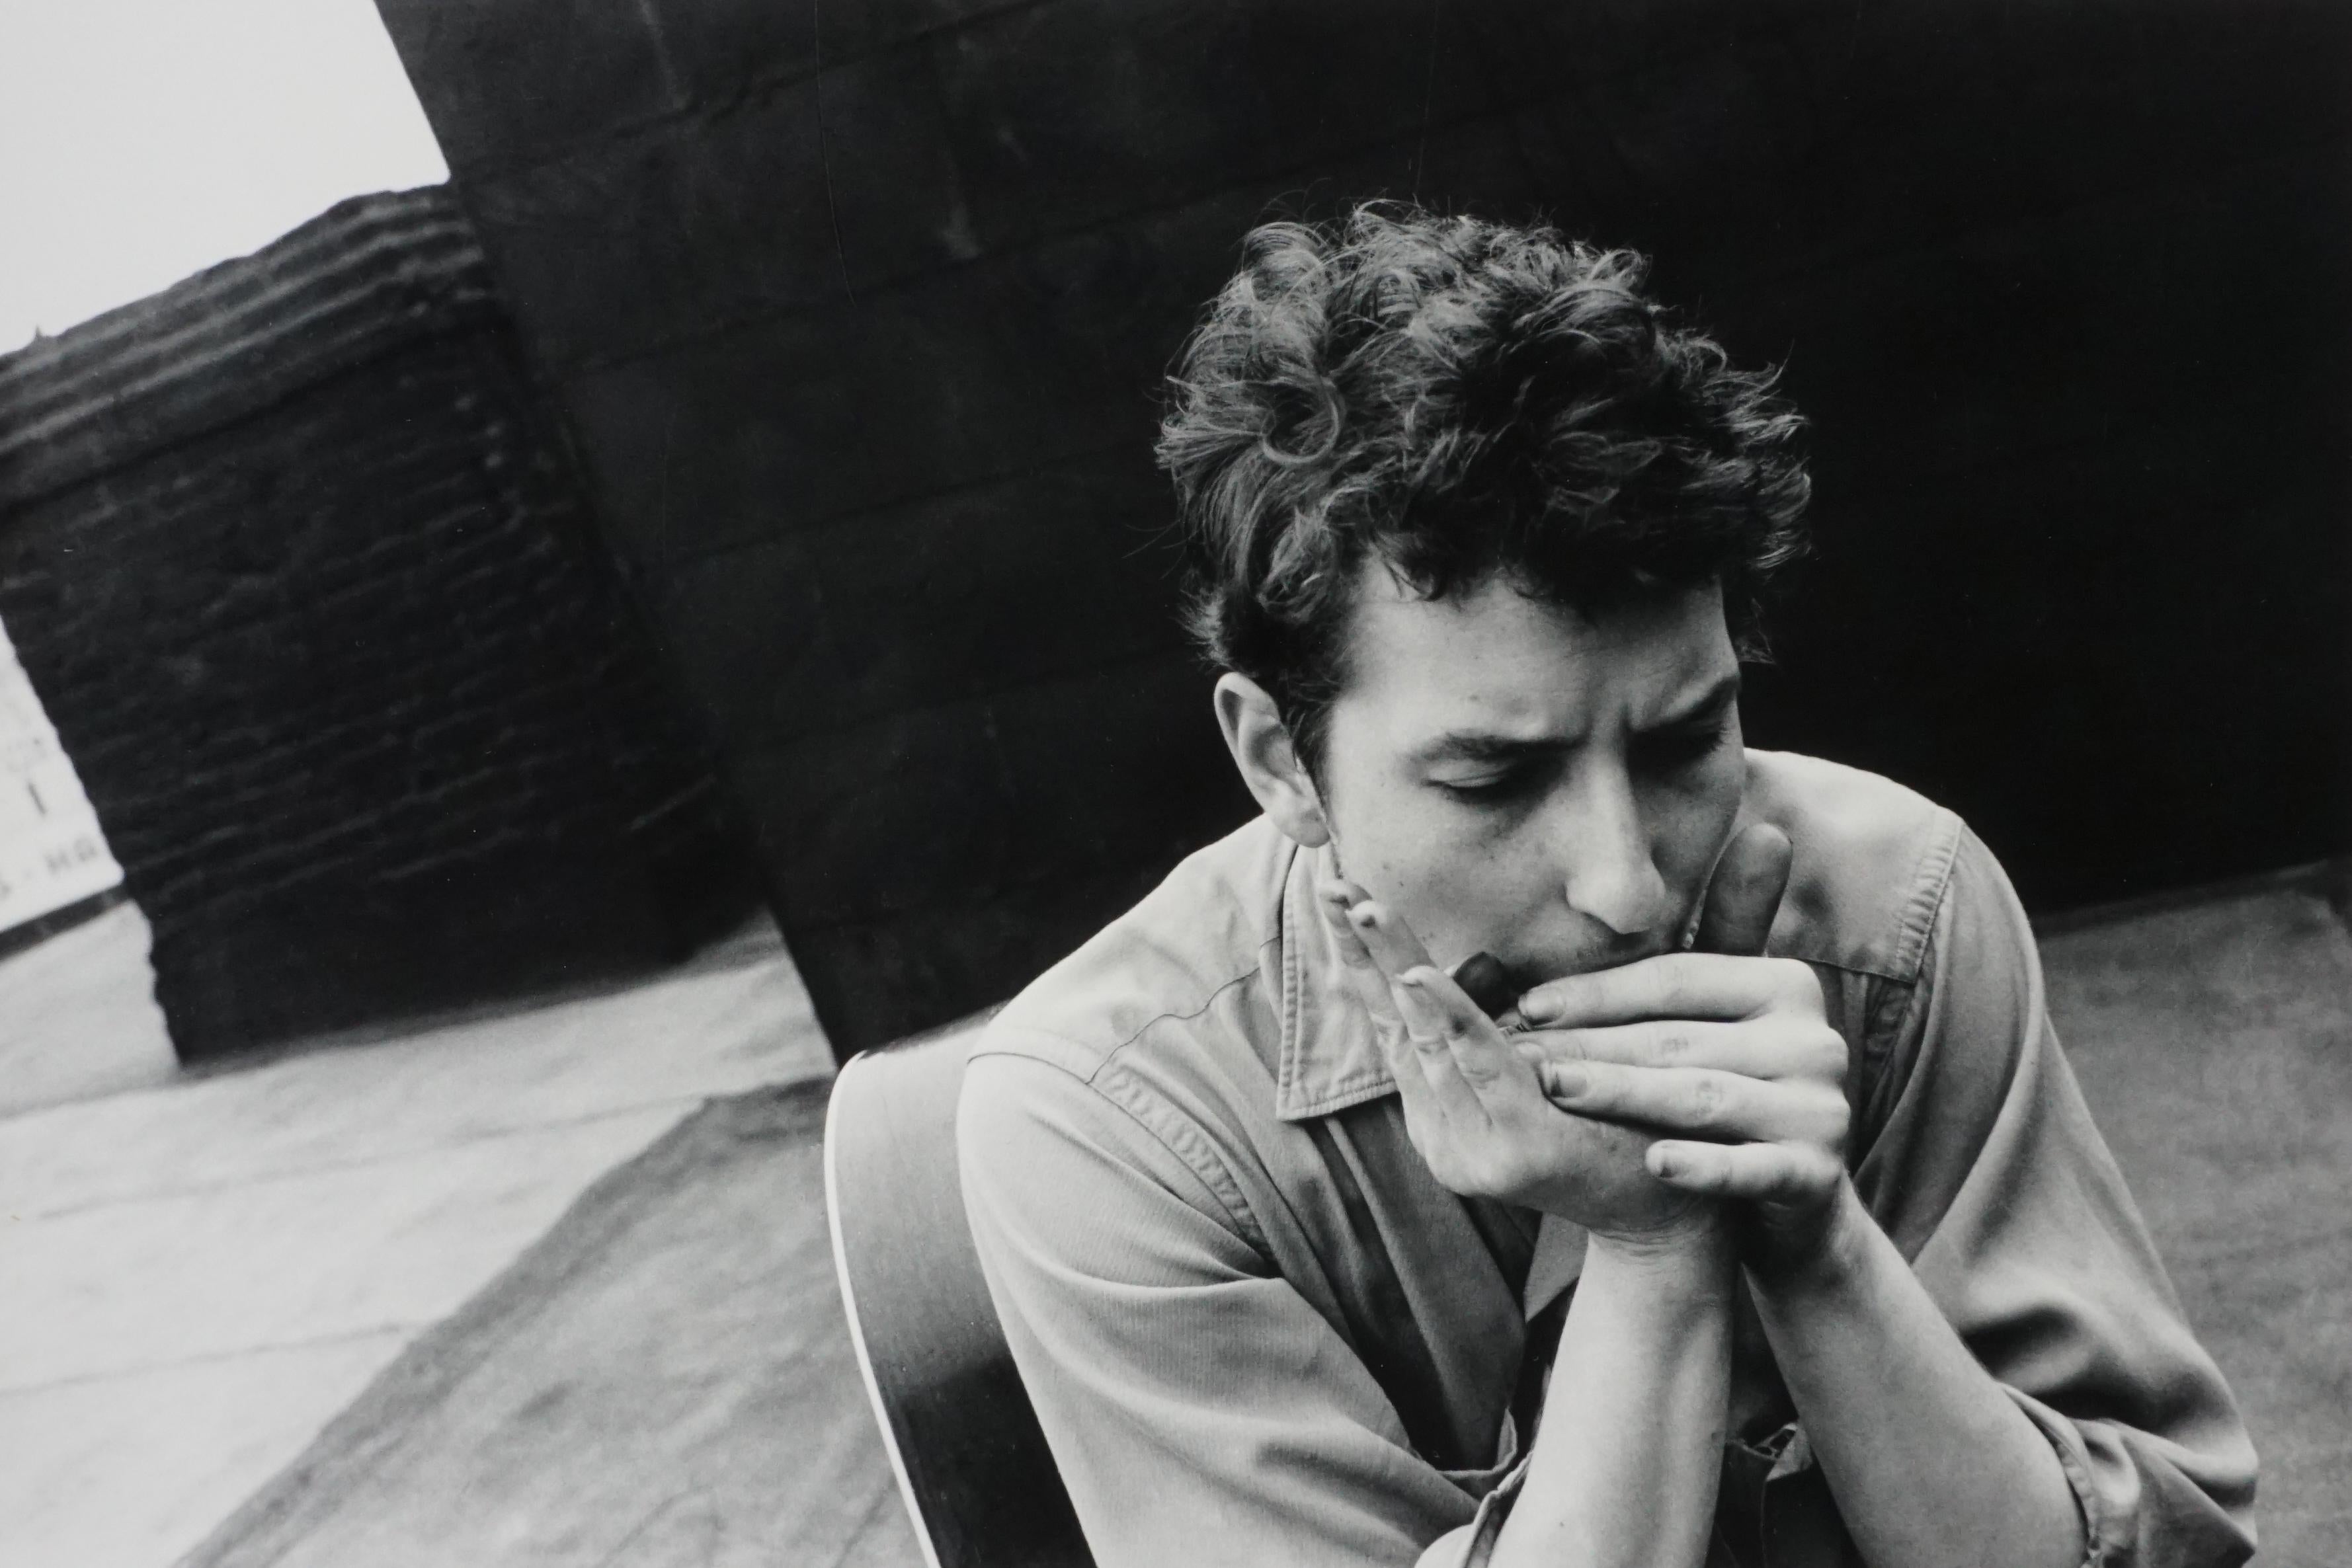 John Cohen Black and White Photograph - Bob Dylan on My Rooftop (playing harmonica), 1962